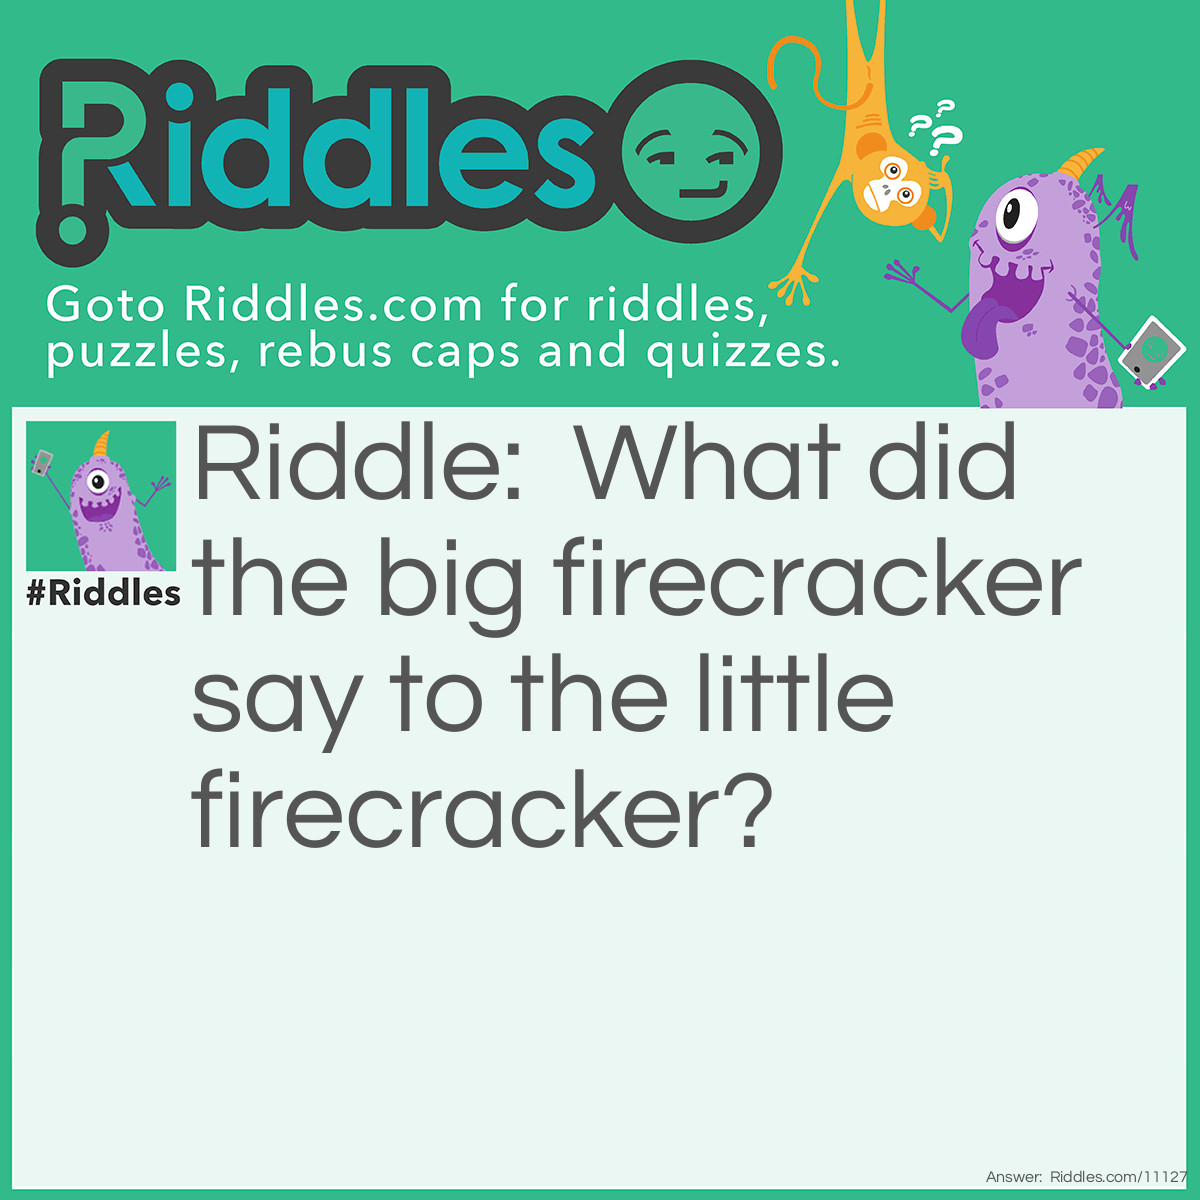 Riddle: What did the big firecracker say to the little firecracker? Answer: My pop is bigger than your pop!